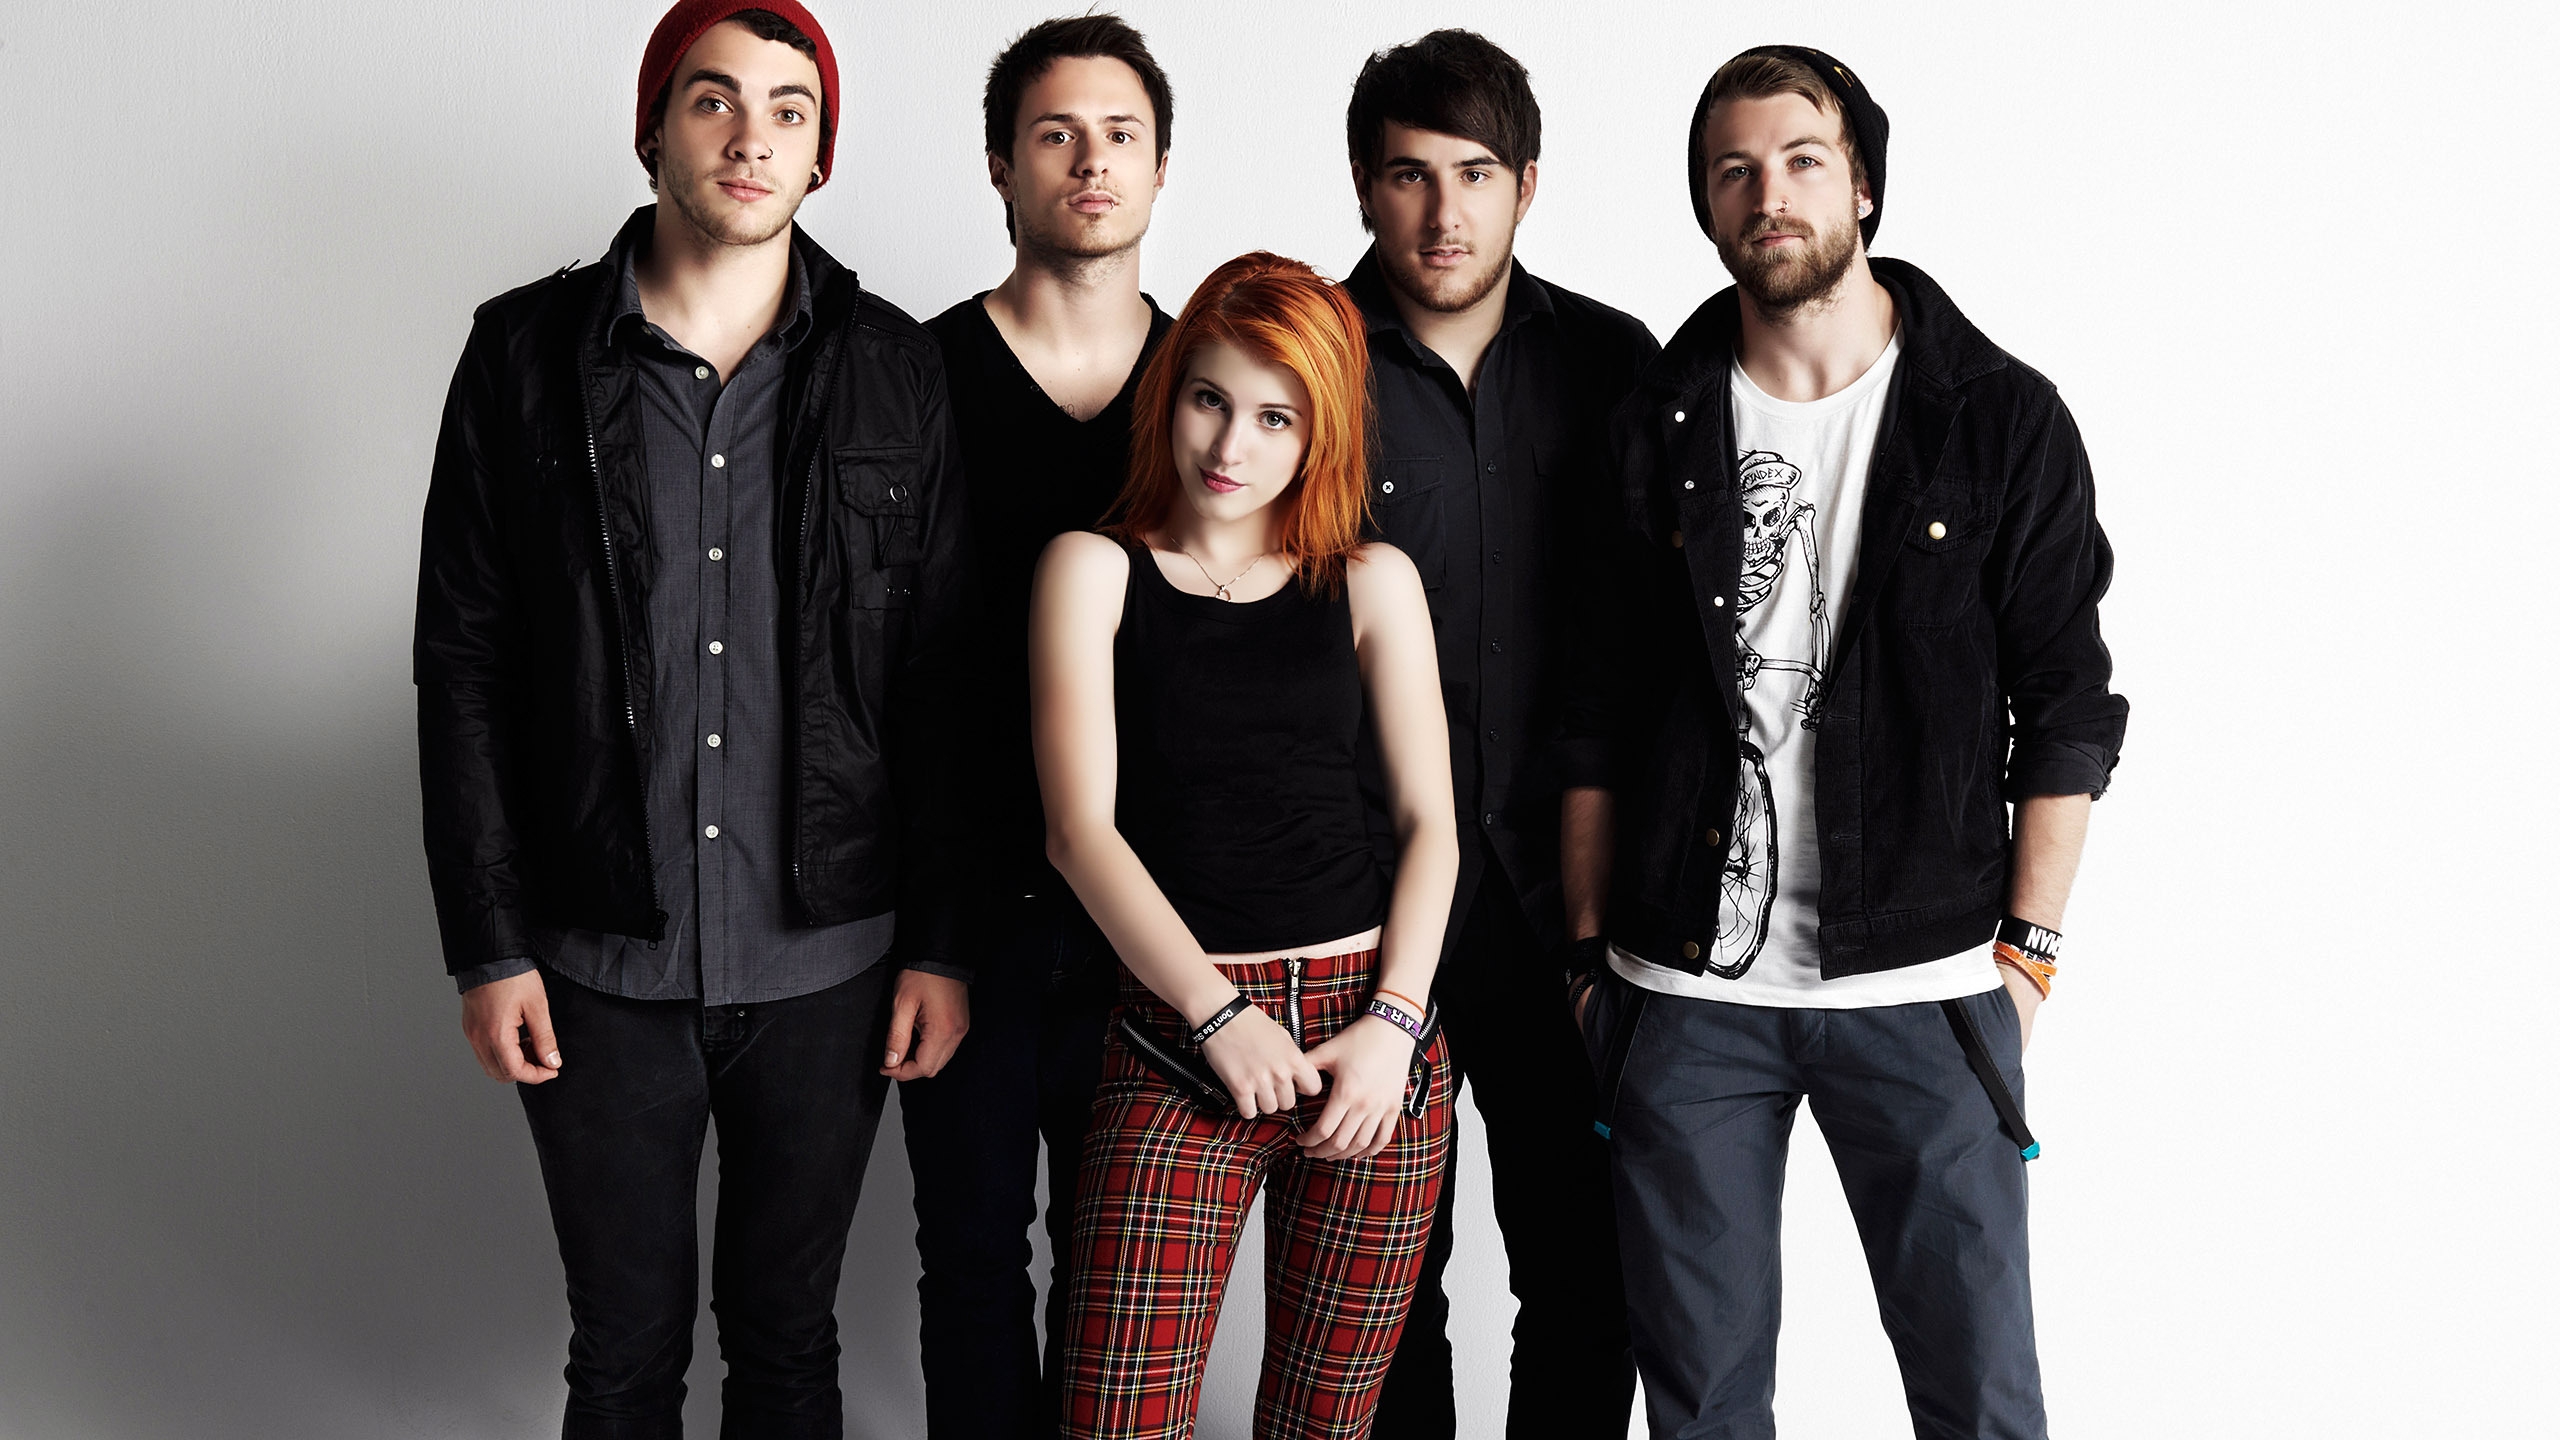 Hayley Williams and Paramore for 2560x1440 HDTV resolution